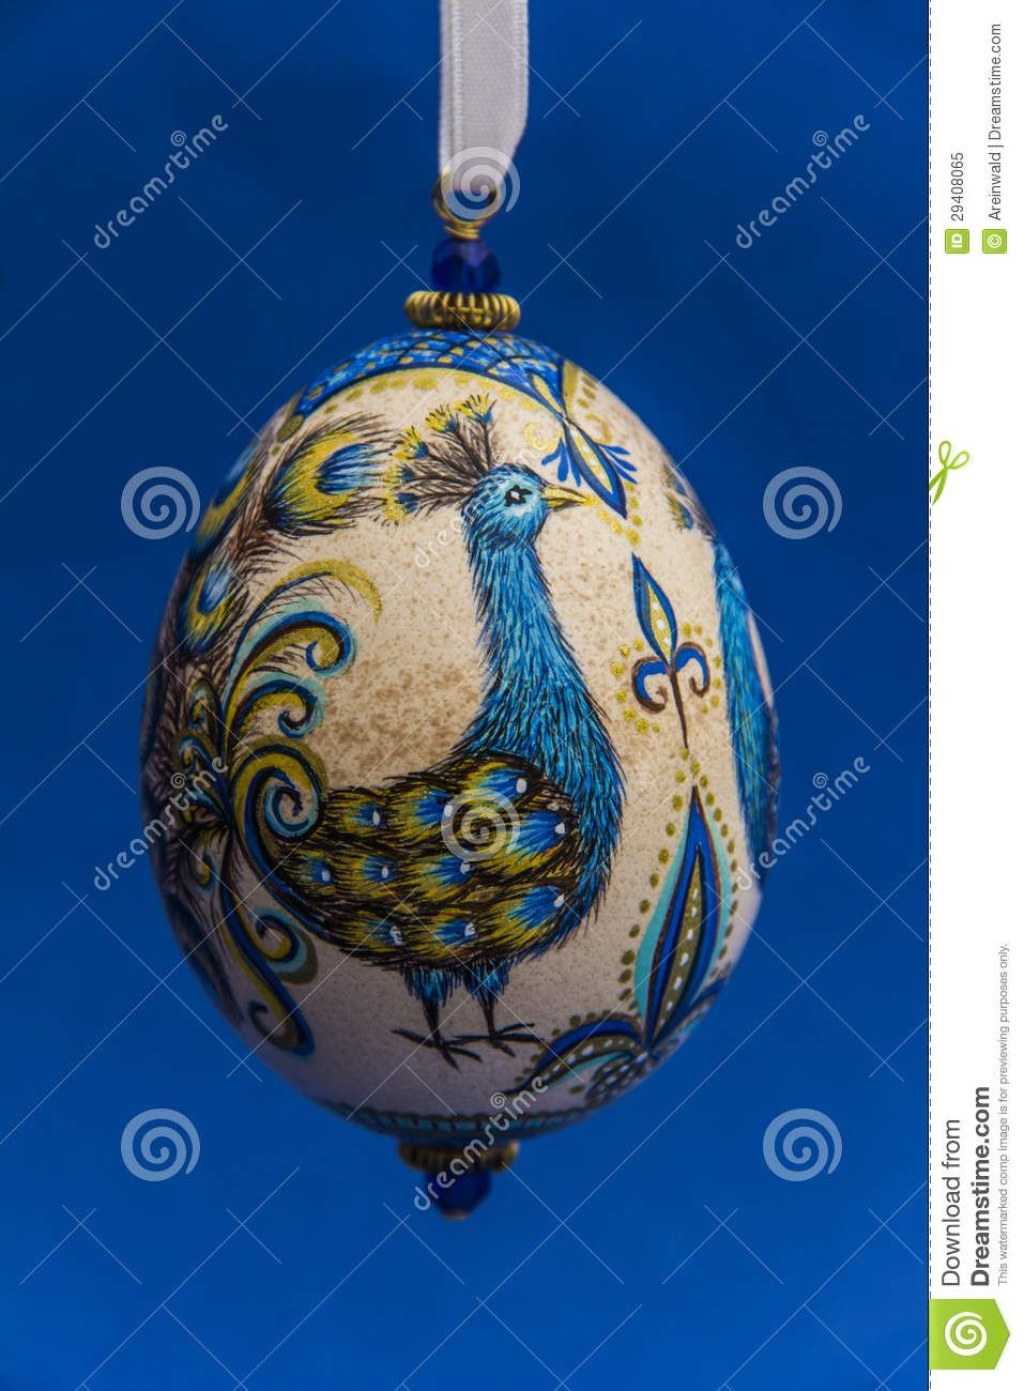 Picture of: Peacock Easter Egg  Easter eggs, Easter egg designs, Colorful quilts